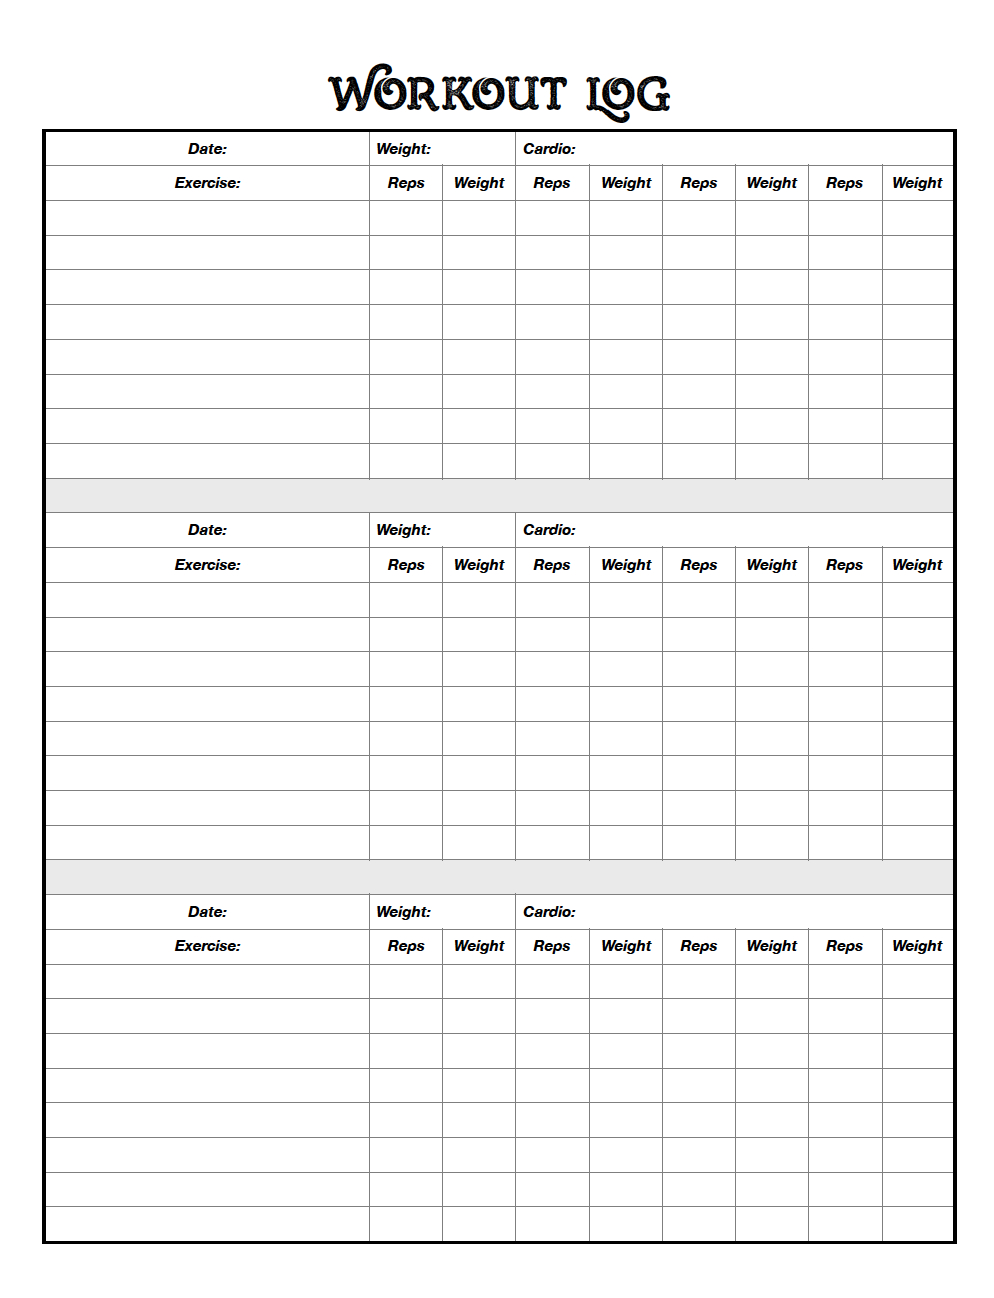 Free Printable Workout Logs: 3 Designs | Work Out Logs | Workout Log - Free Printable Fitness Log